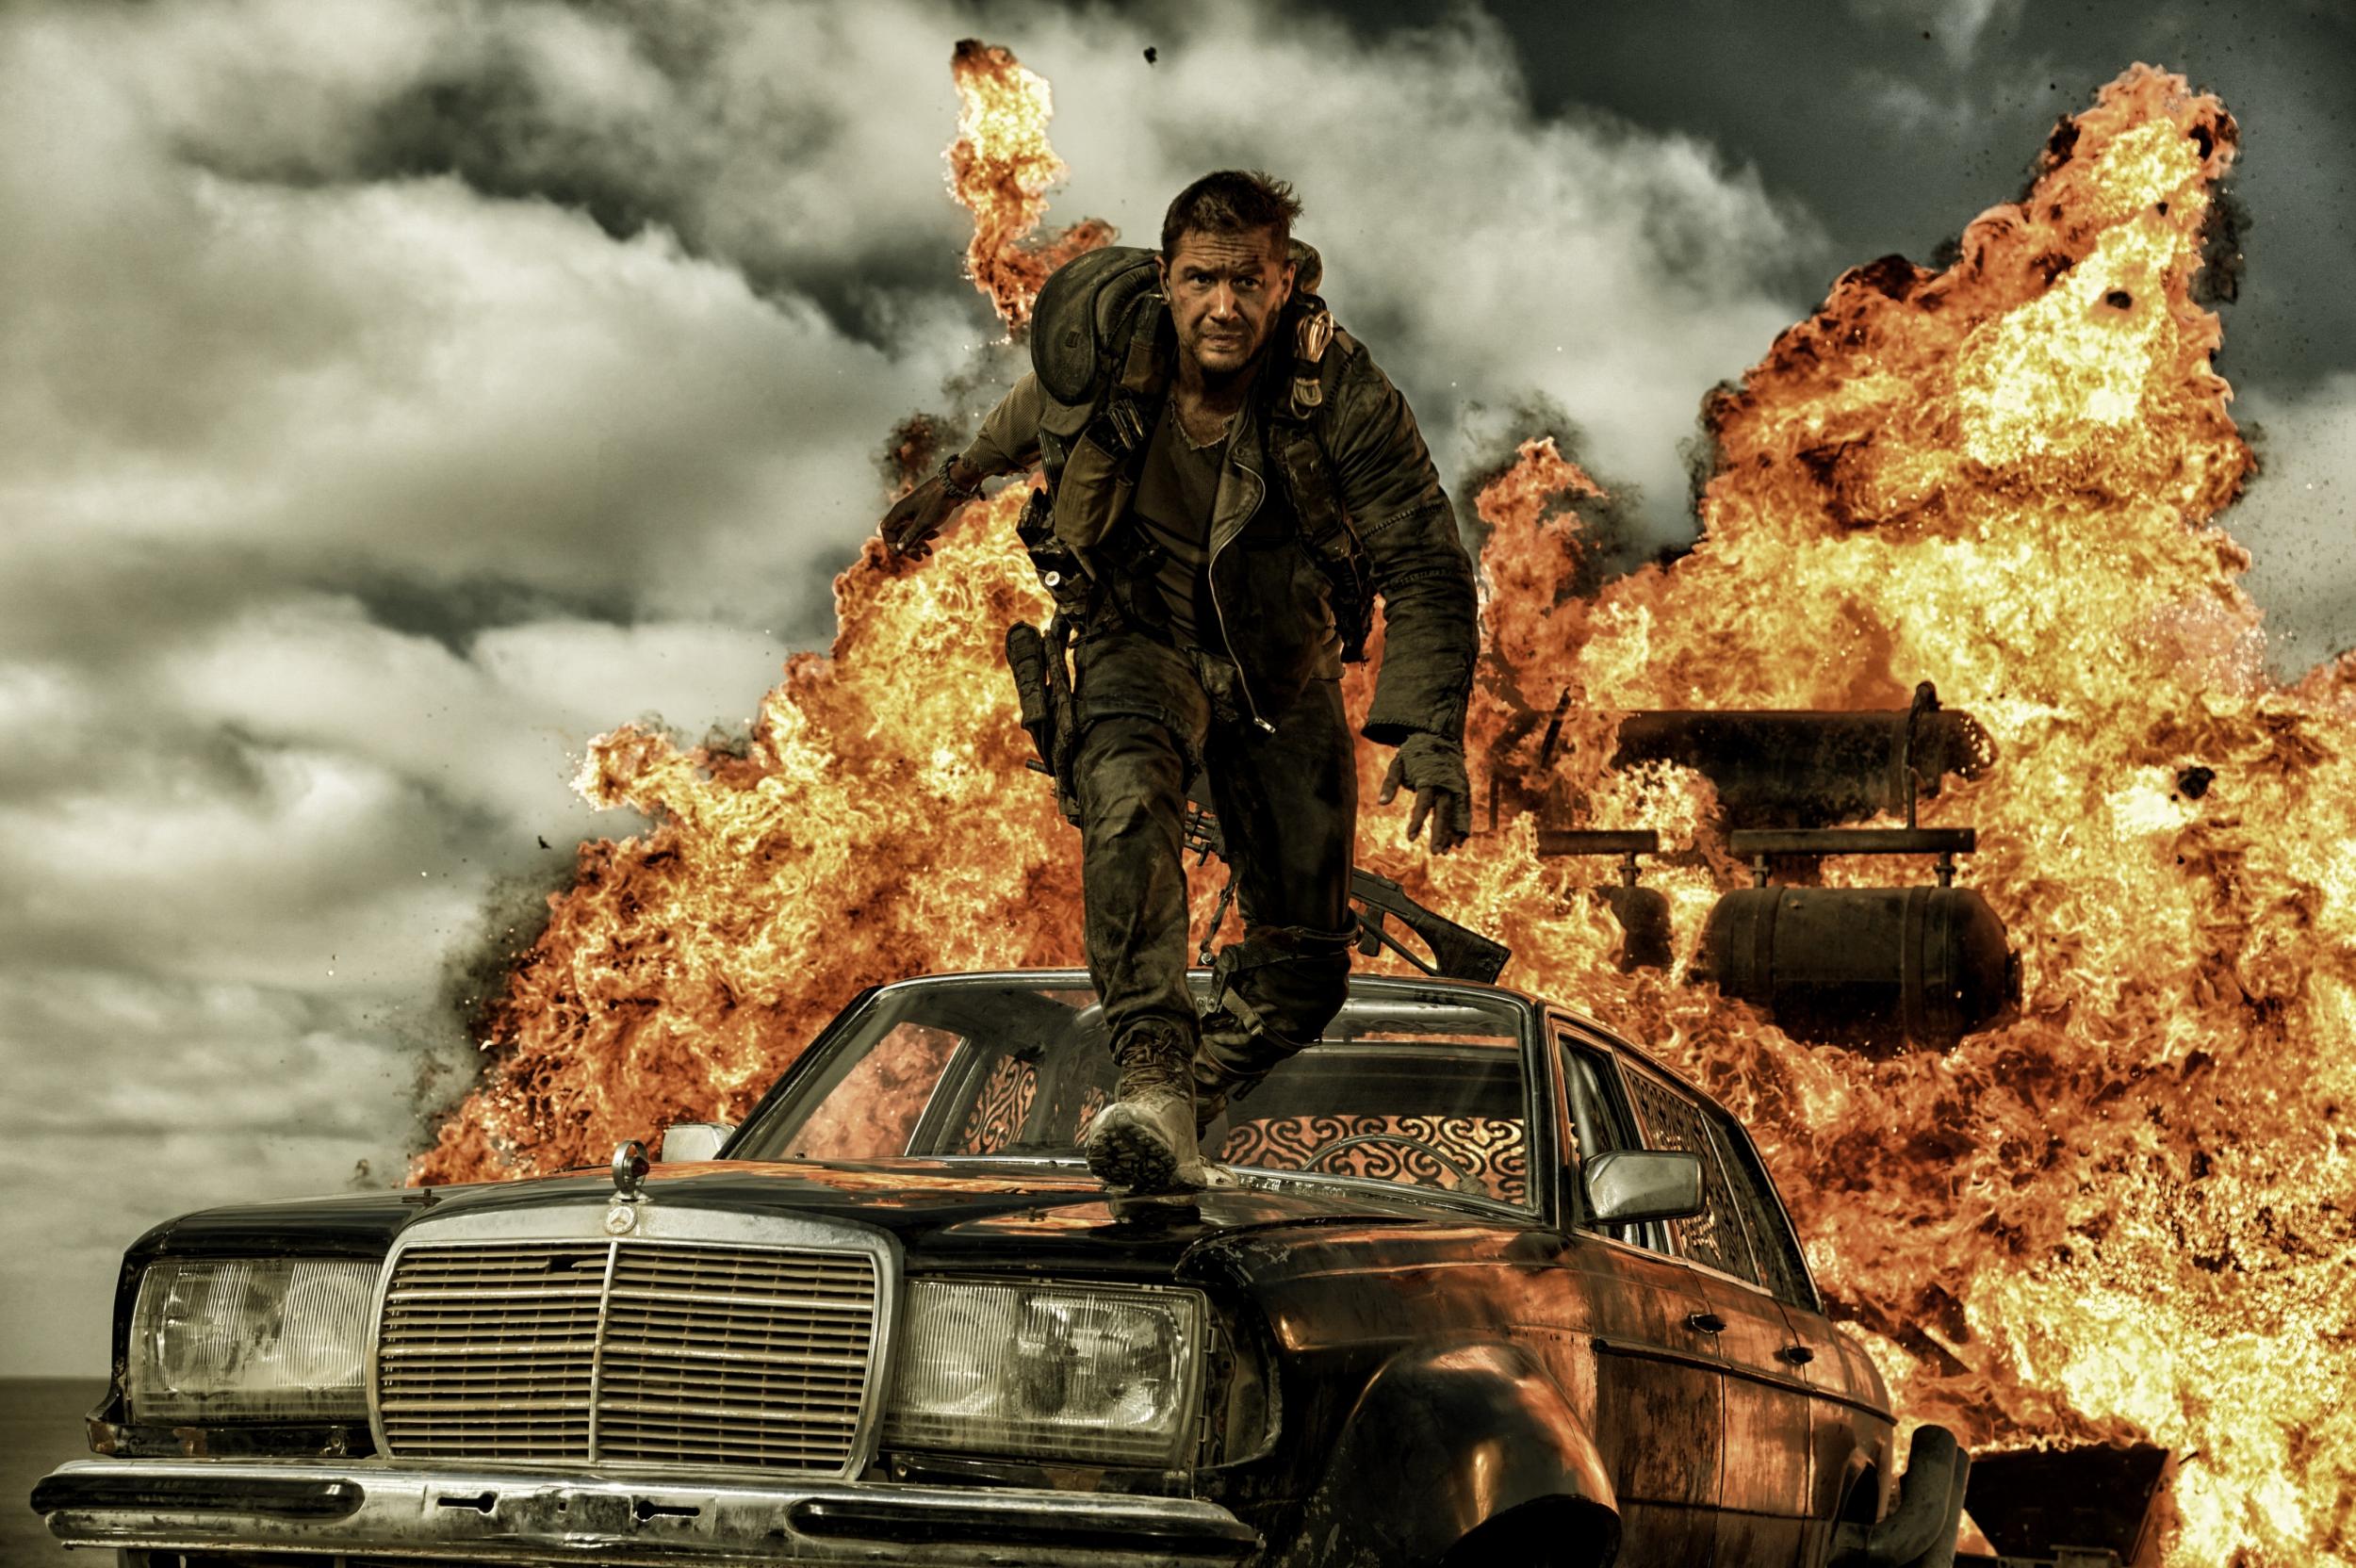 Mad Max: Fury Road is nominated for 10 Oscars but the stunt coordinators and performers will be ignored